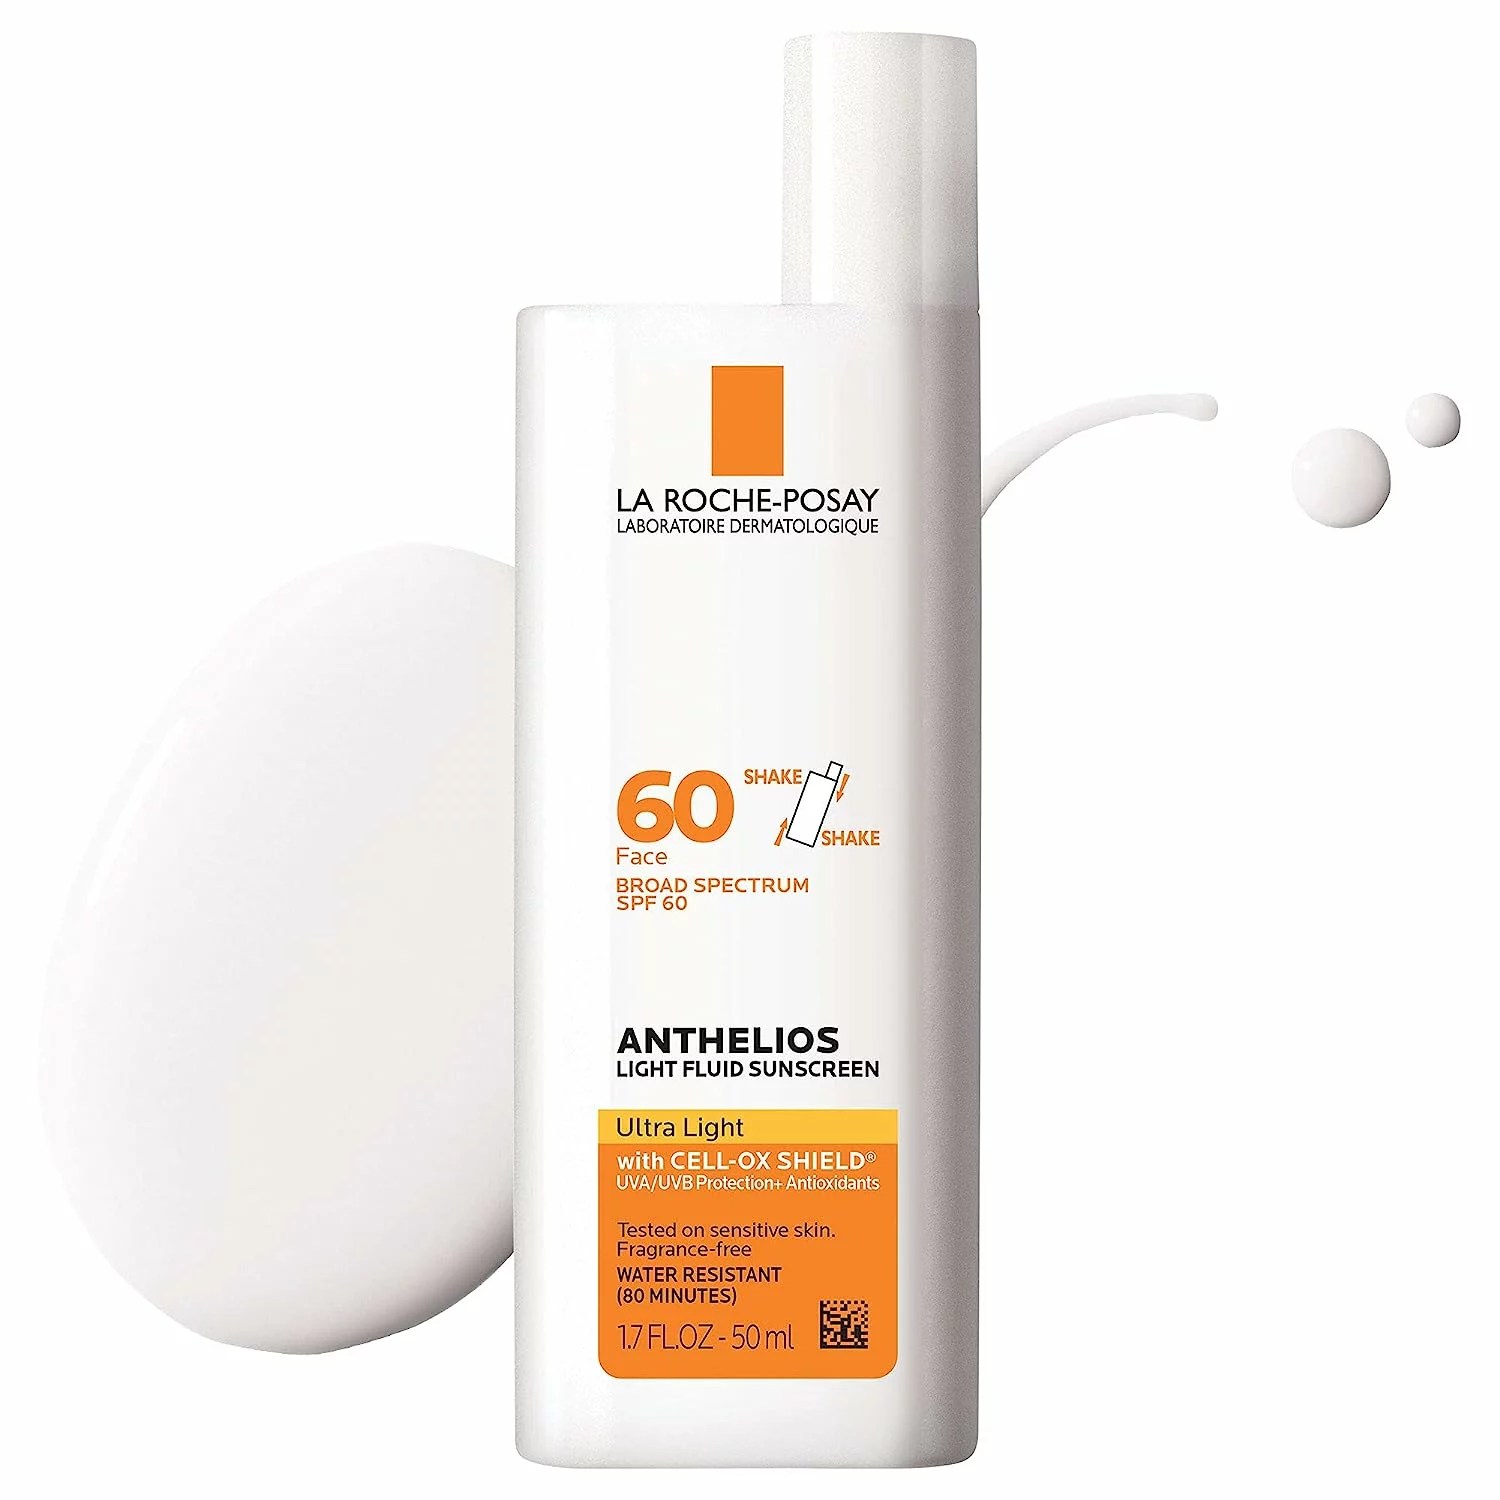 La Roche-Posay Anthelios Light Fluid Face Sunscreen SPF 60, sunscreens for acen prone skin